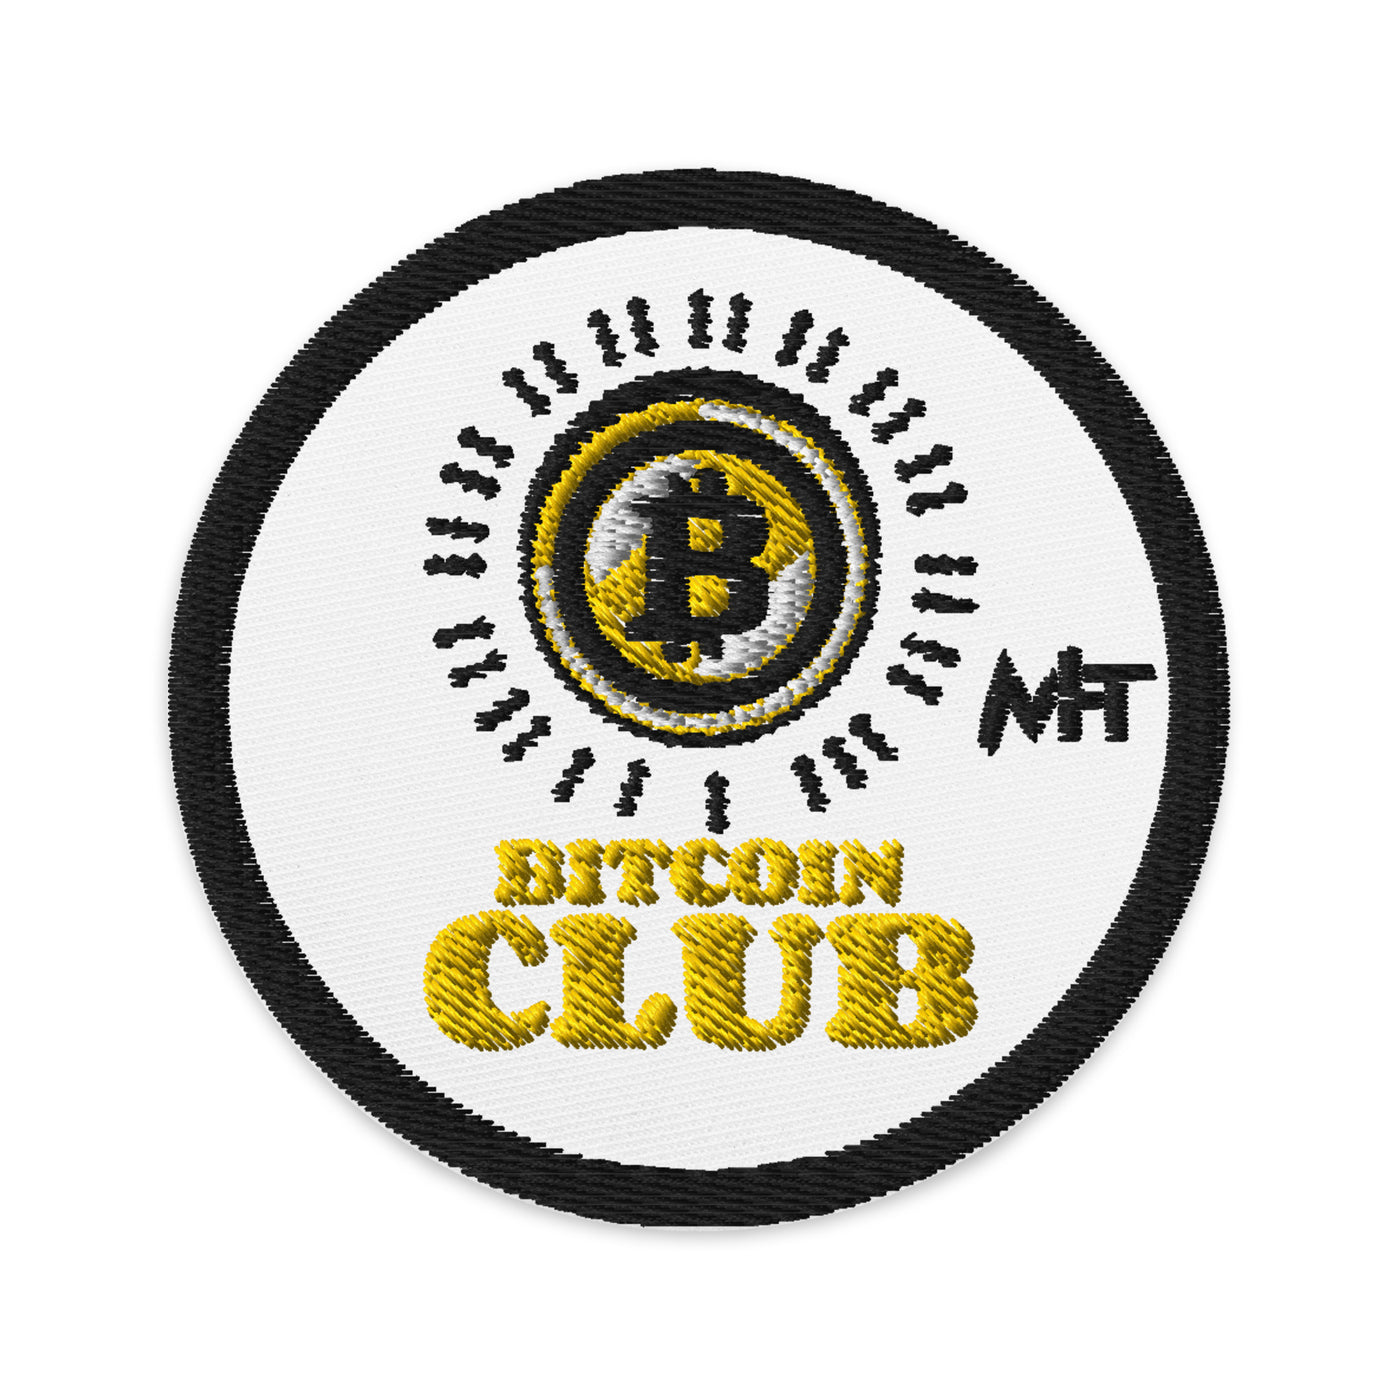 BITCOIN CLUB - Embroidered patches